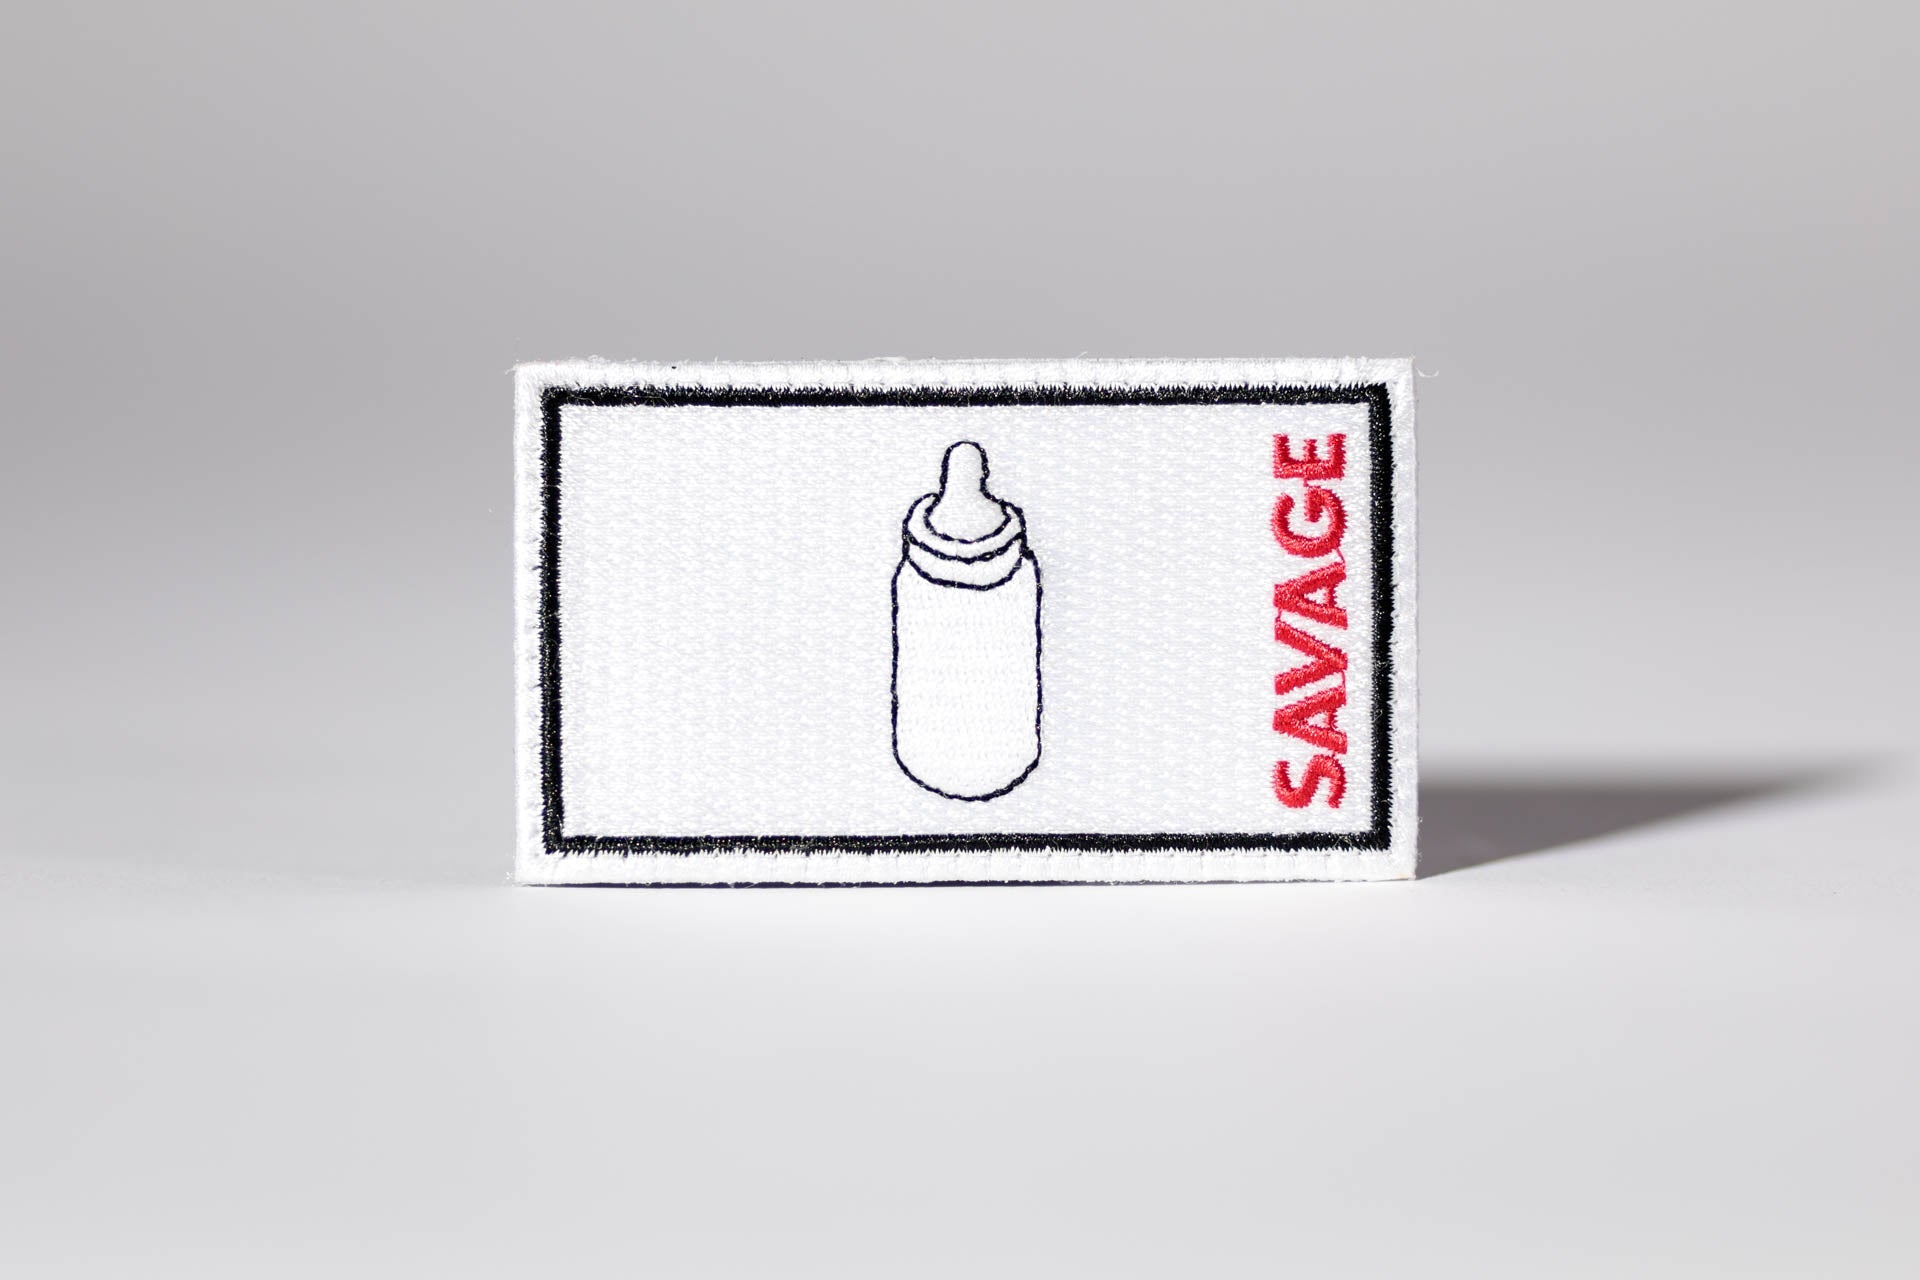 Savage Industries Bottle Patch